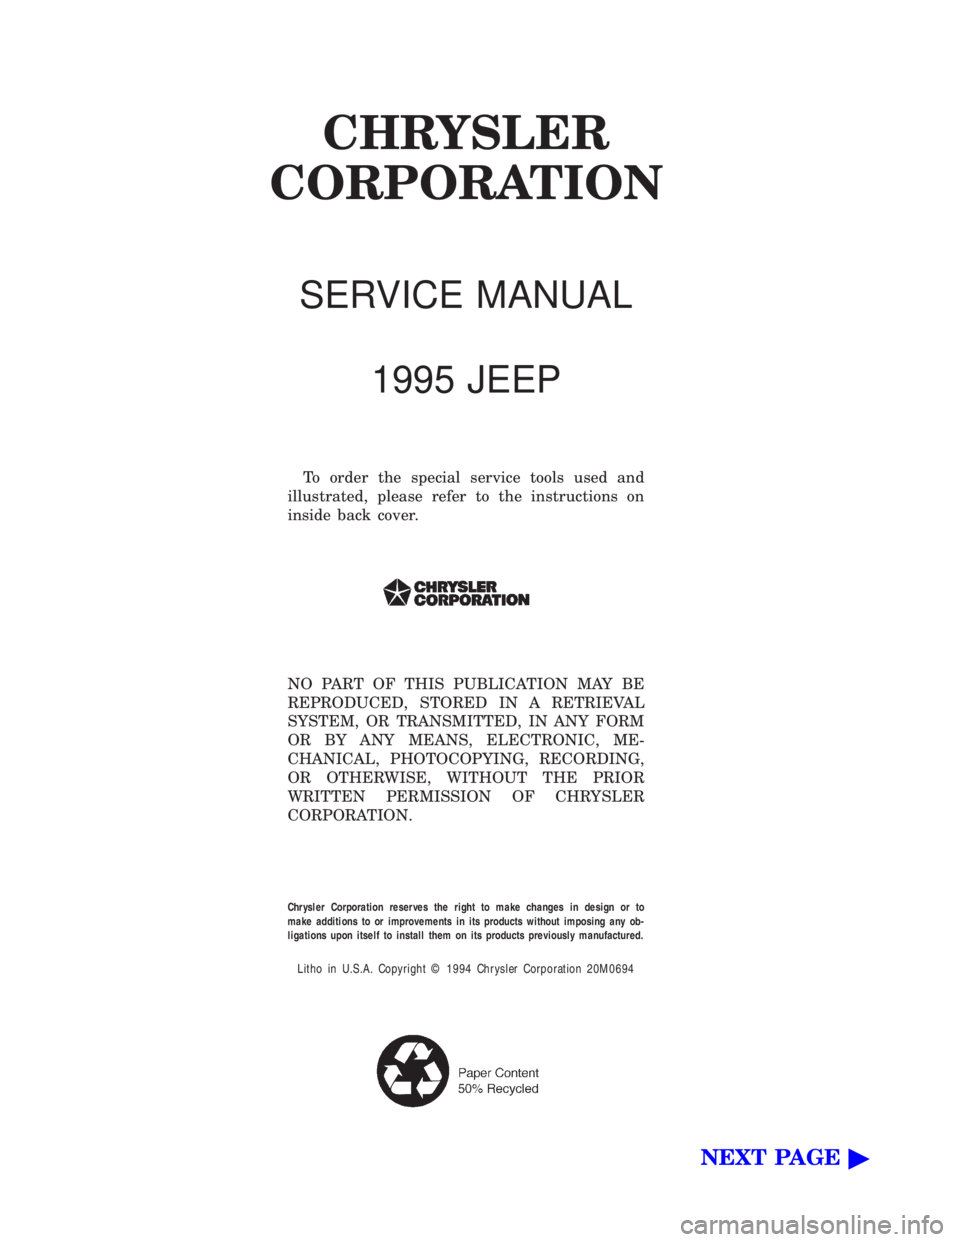 JEEP XJ 1995  Service And Repair Manual CHRYSLER
CORPORATION
SERVICE MANUAL
1995 JEEP
To order the special service tools used and
illustrated, please refer to the instructions on
inside back cover.
NO PART OF THIS PUBLICATION MAY BE
REPRODU